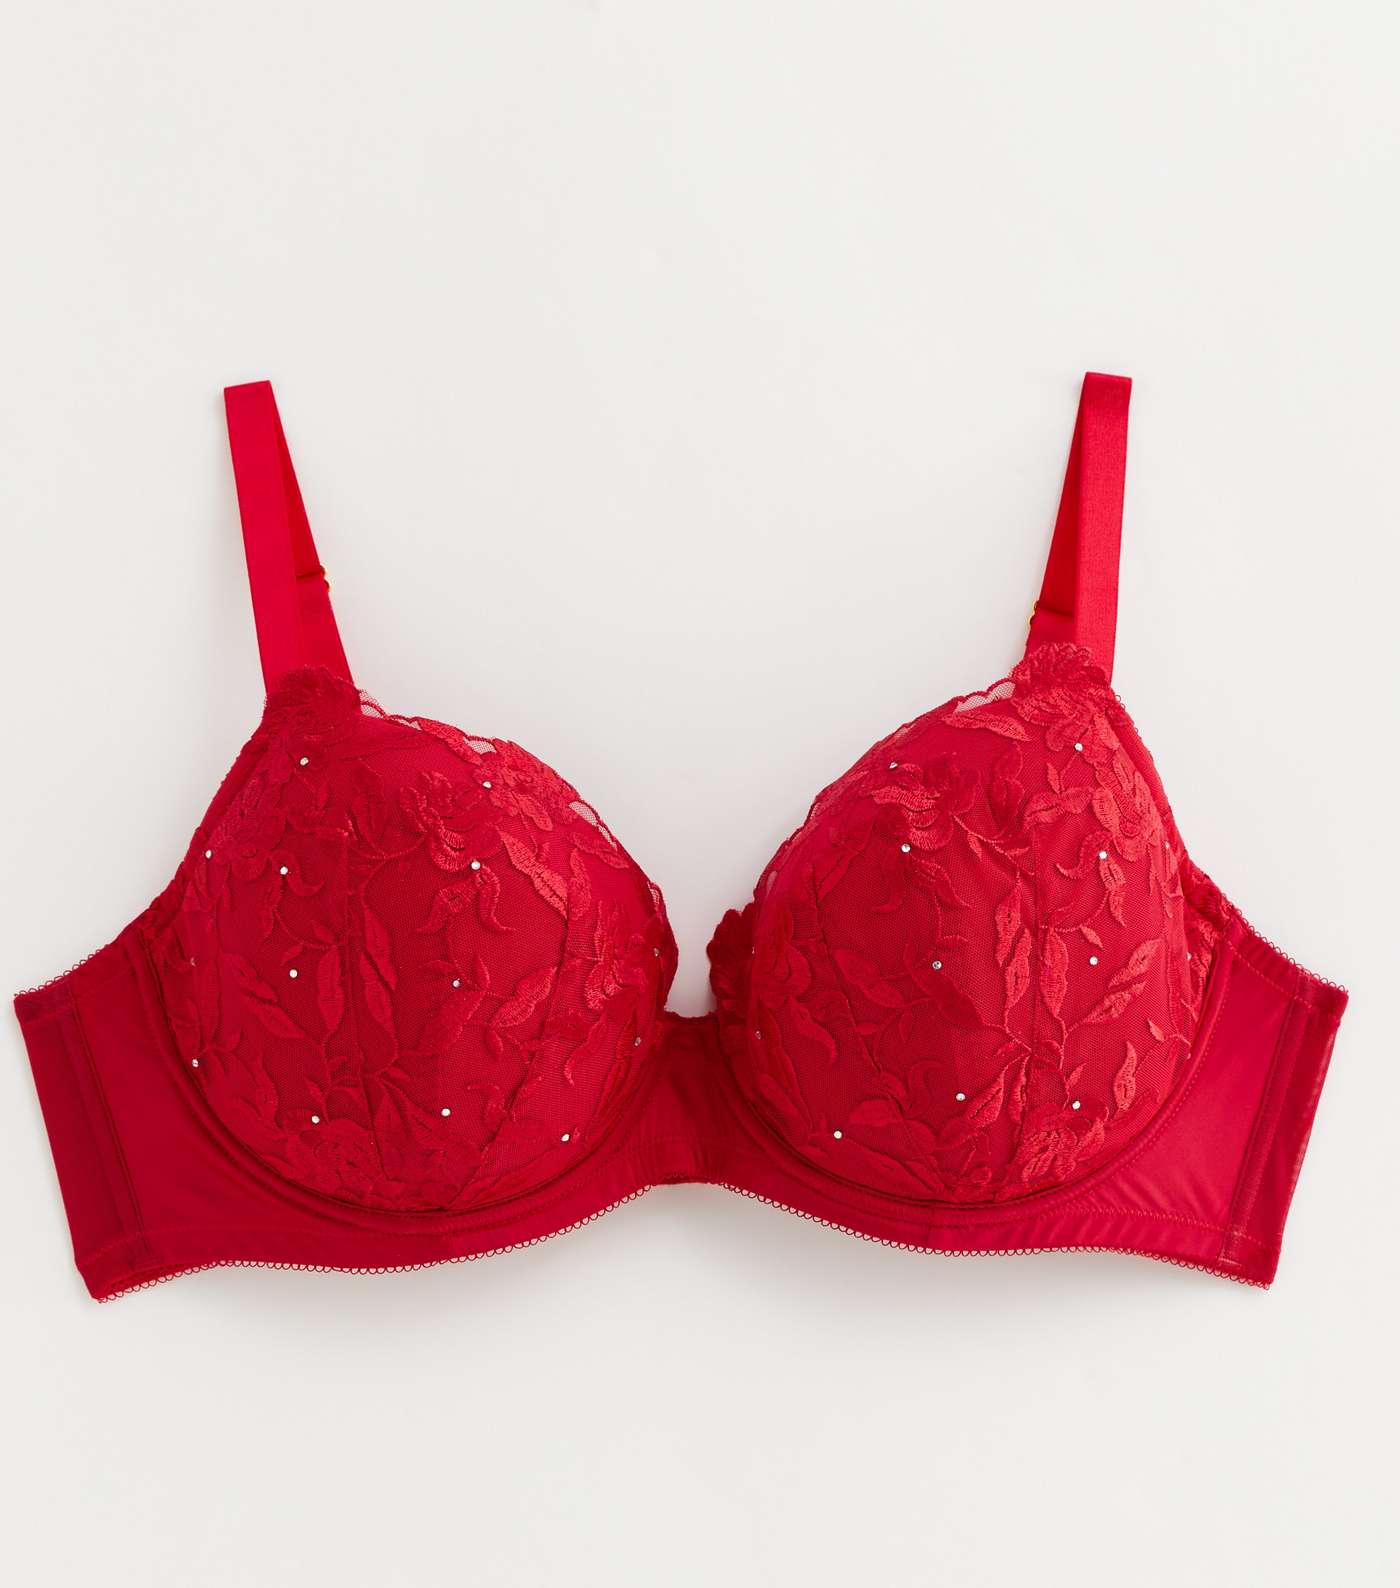 Red Embroidered Lace Underwired +Dd Bra